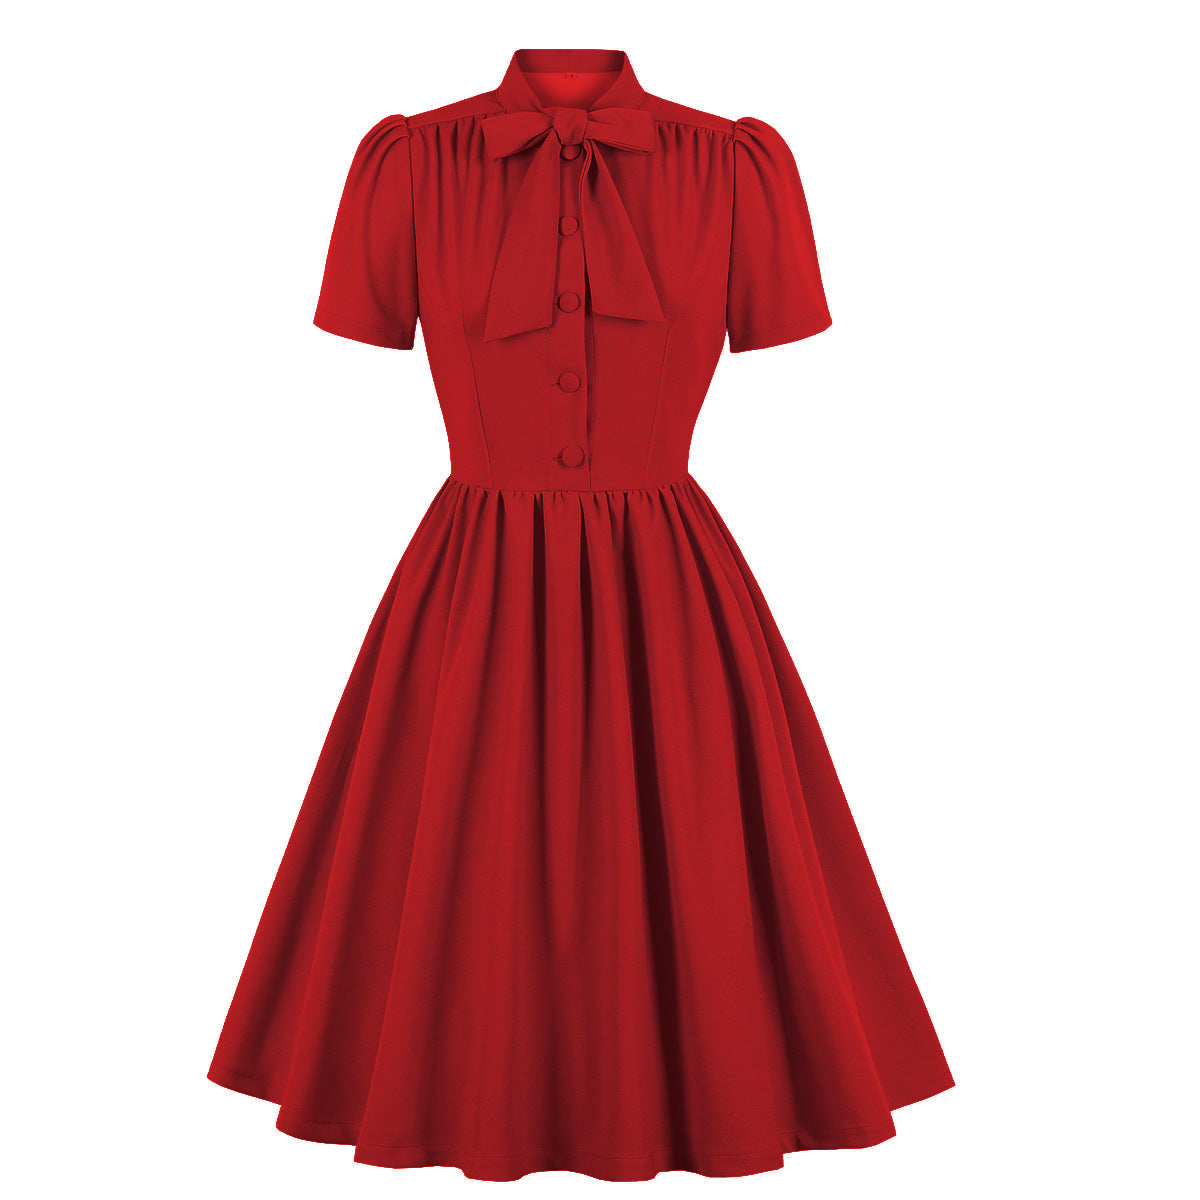 Classy Vintage A Line Women Dresses with Neck Bow